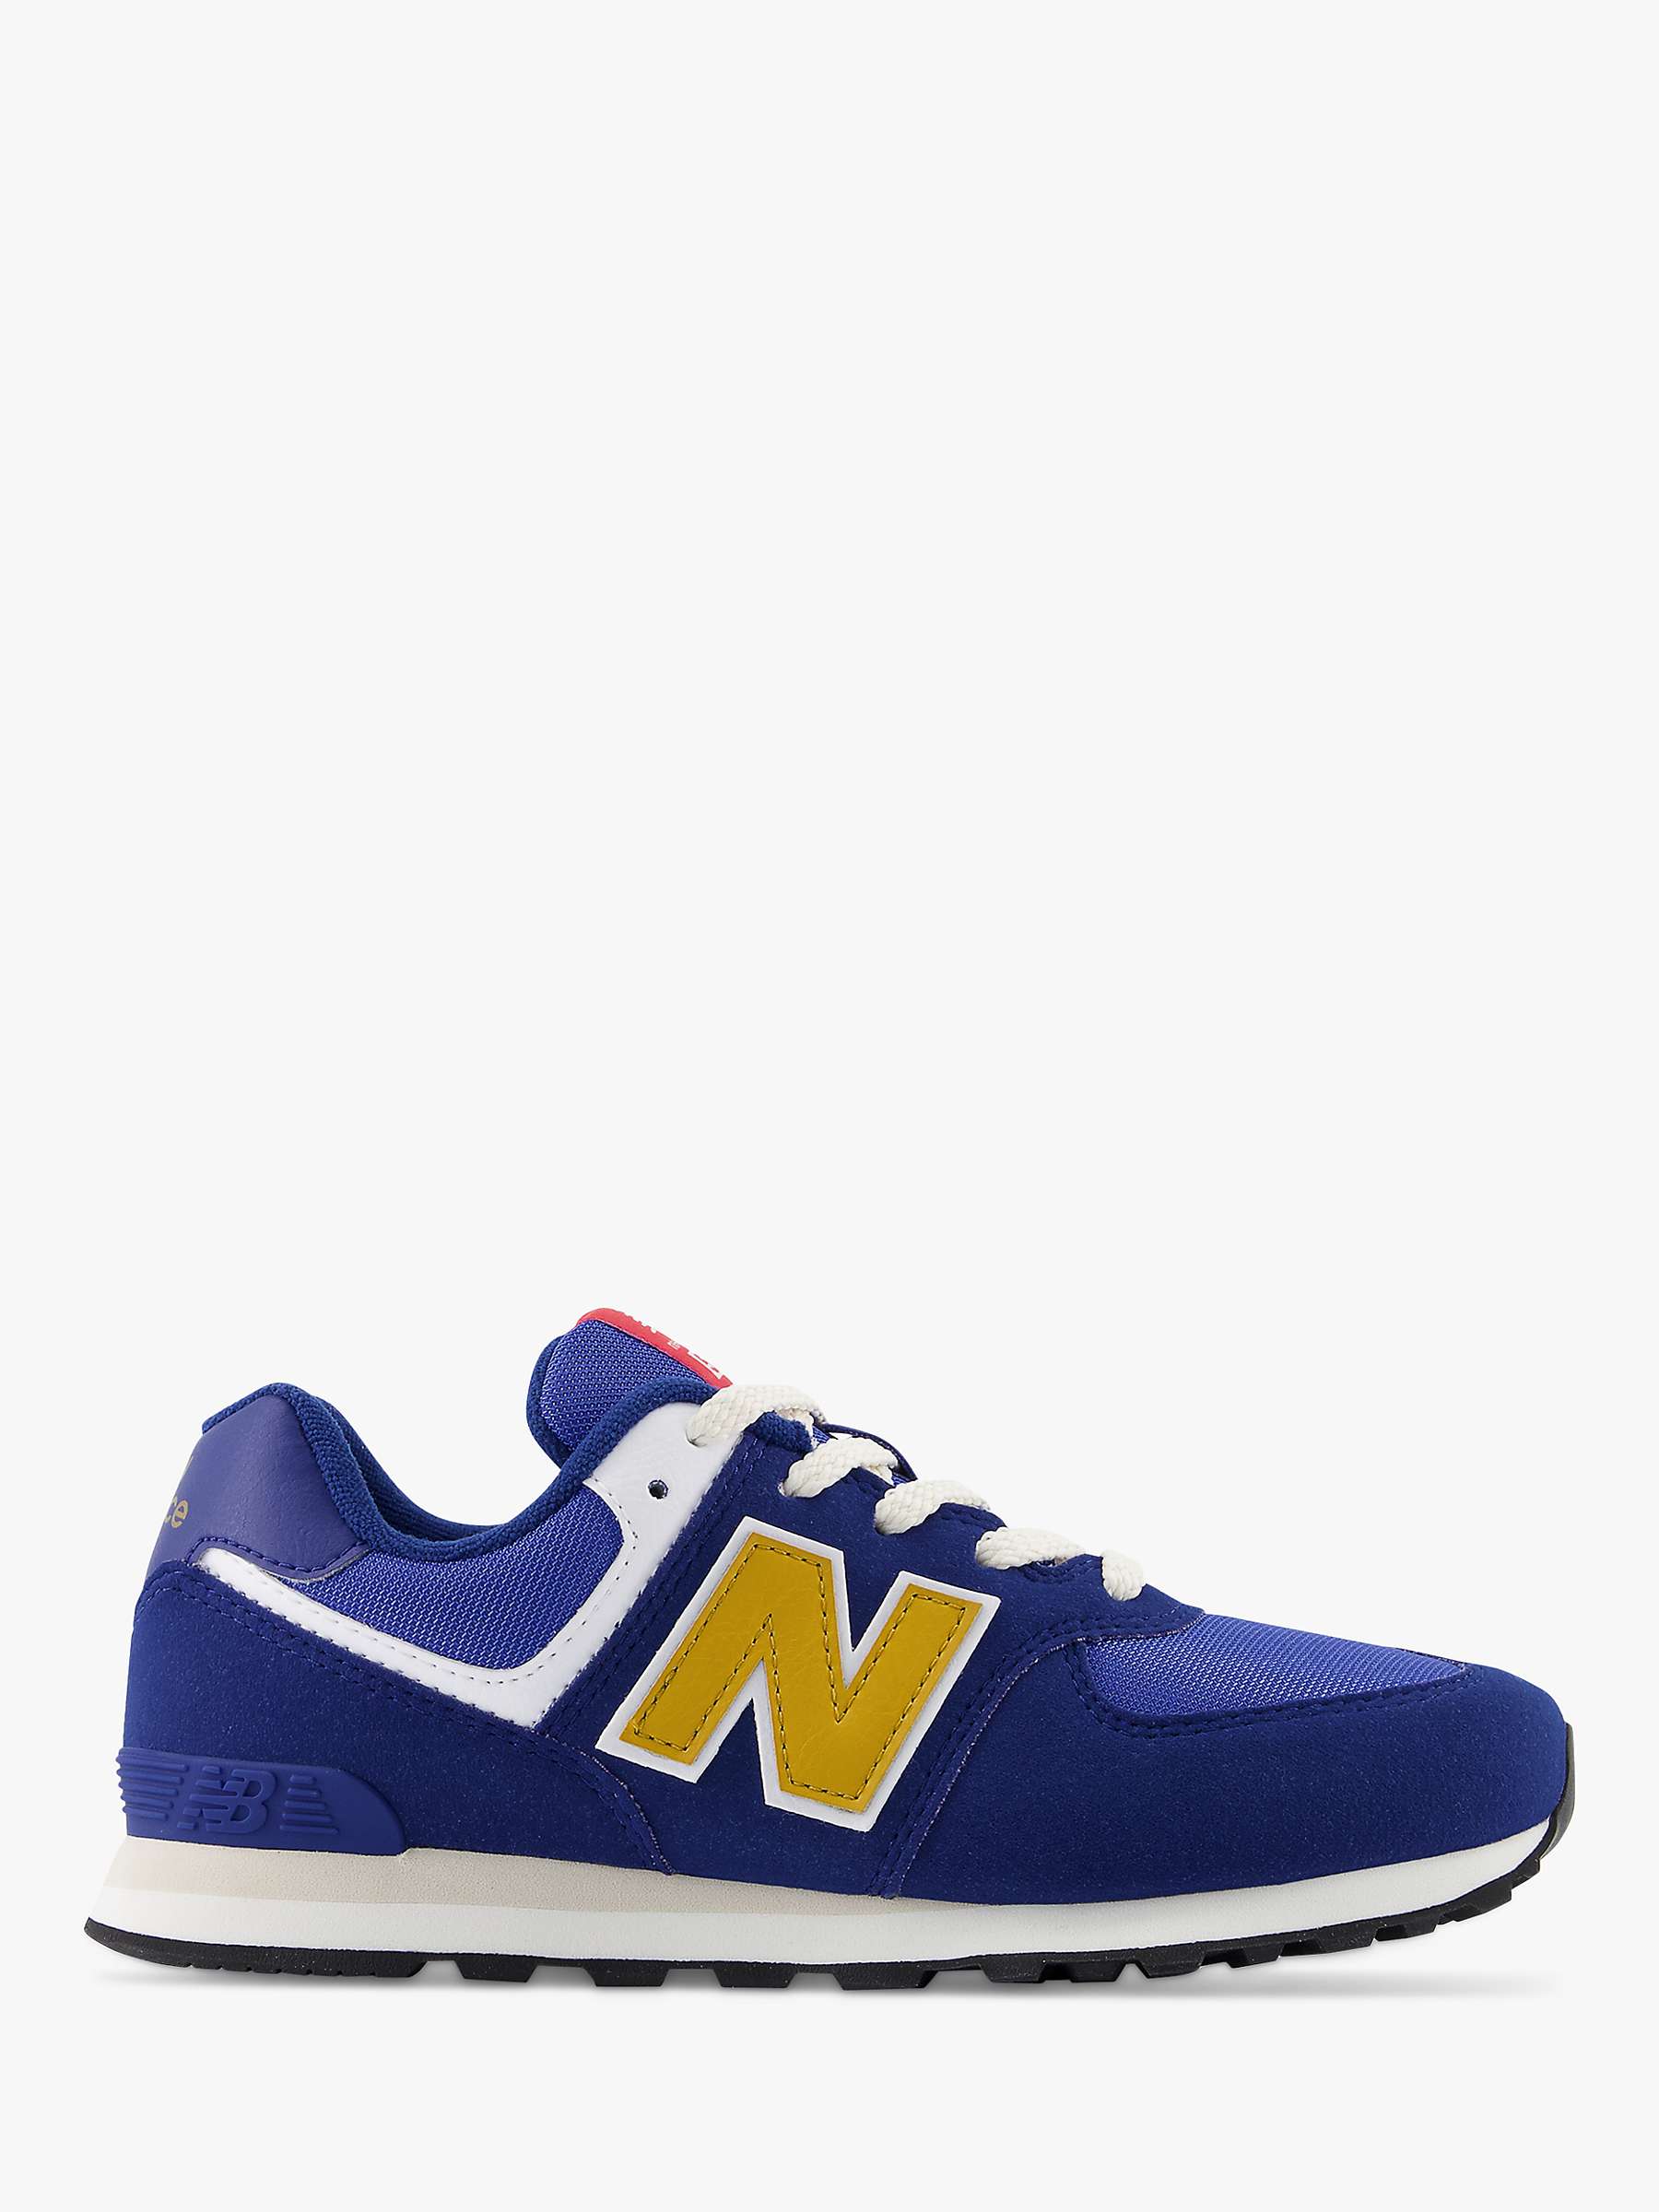 Buy New Balance Kids' 574 Lace-Up Trainers, Blue/Multi Online at johnlewis.com